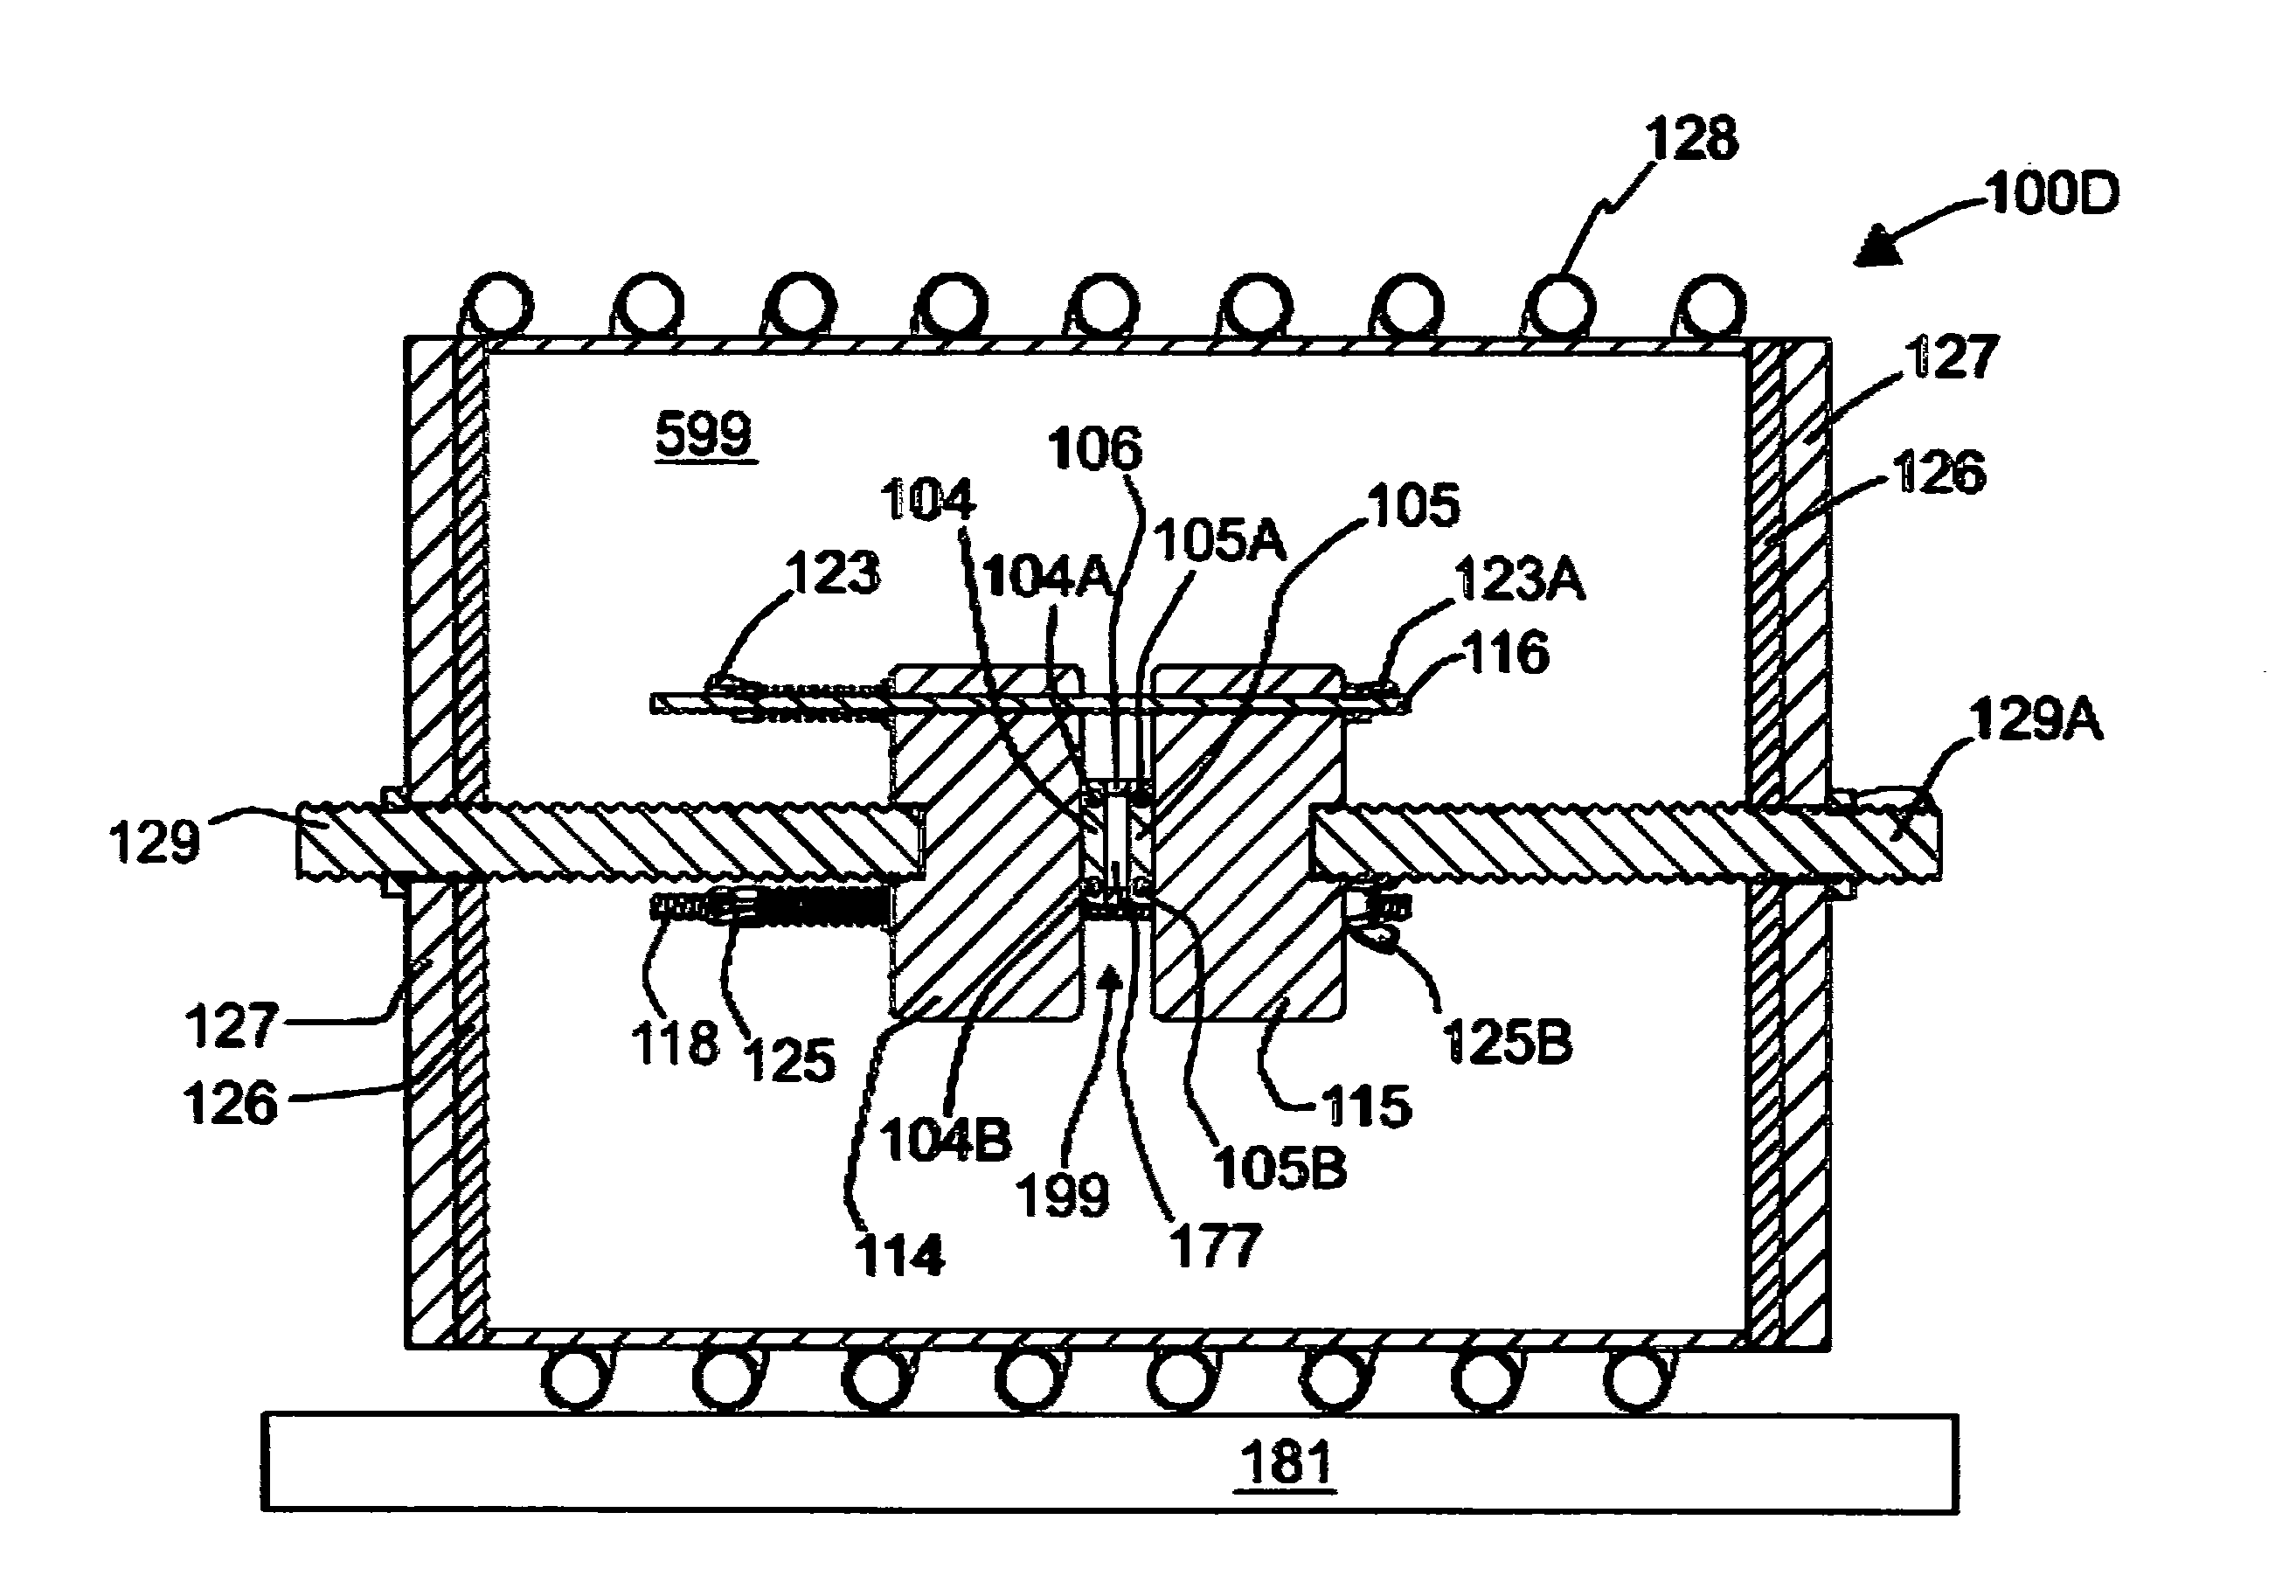 Method and Apparatus for Measuring Thermal Conductivity of Small, Highly Insulating Specimens